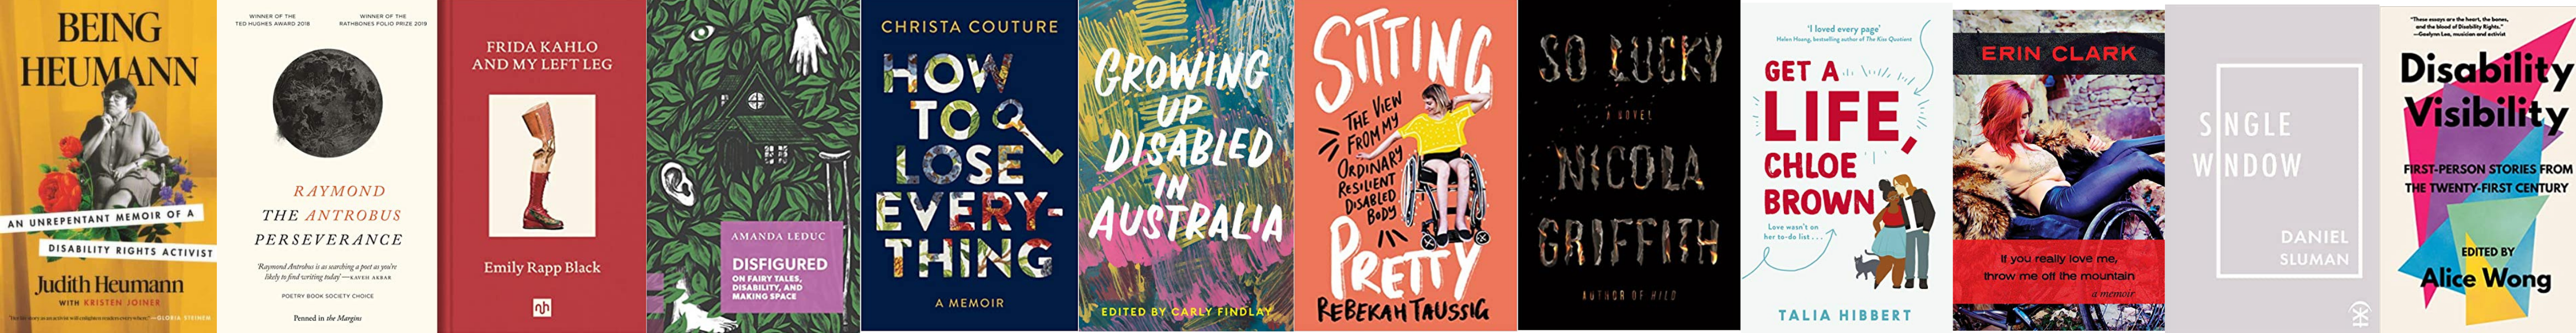 A collage of adult books on our list - from Being Heumann to Disability Visibility.